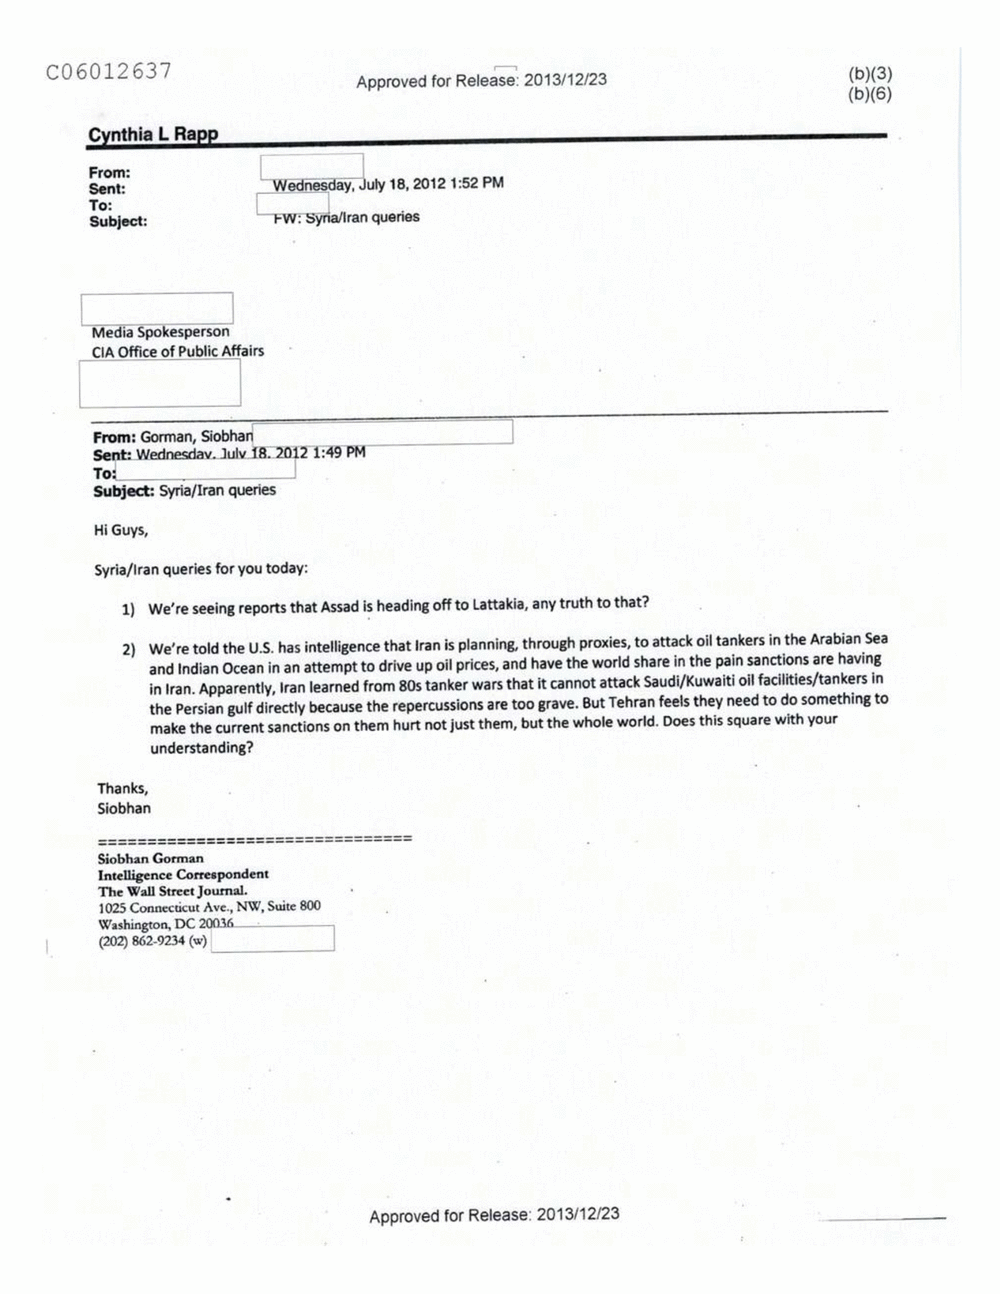 Page 201 from Email Correspondence Between Reporters and CIA Flacks